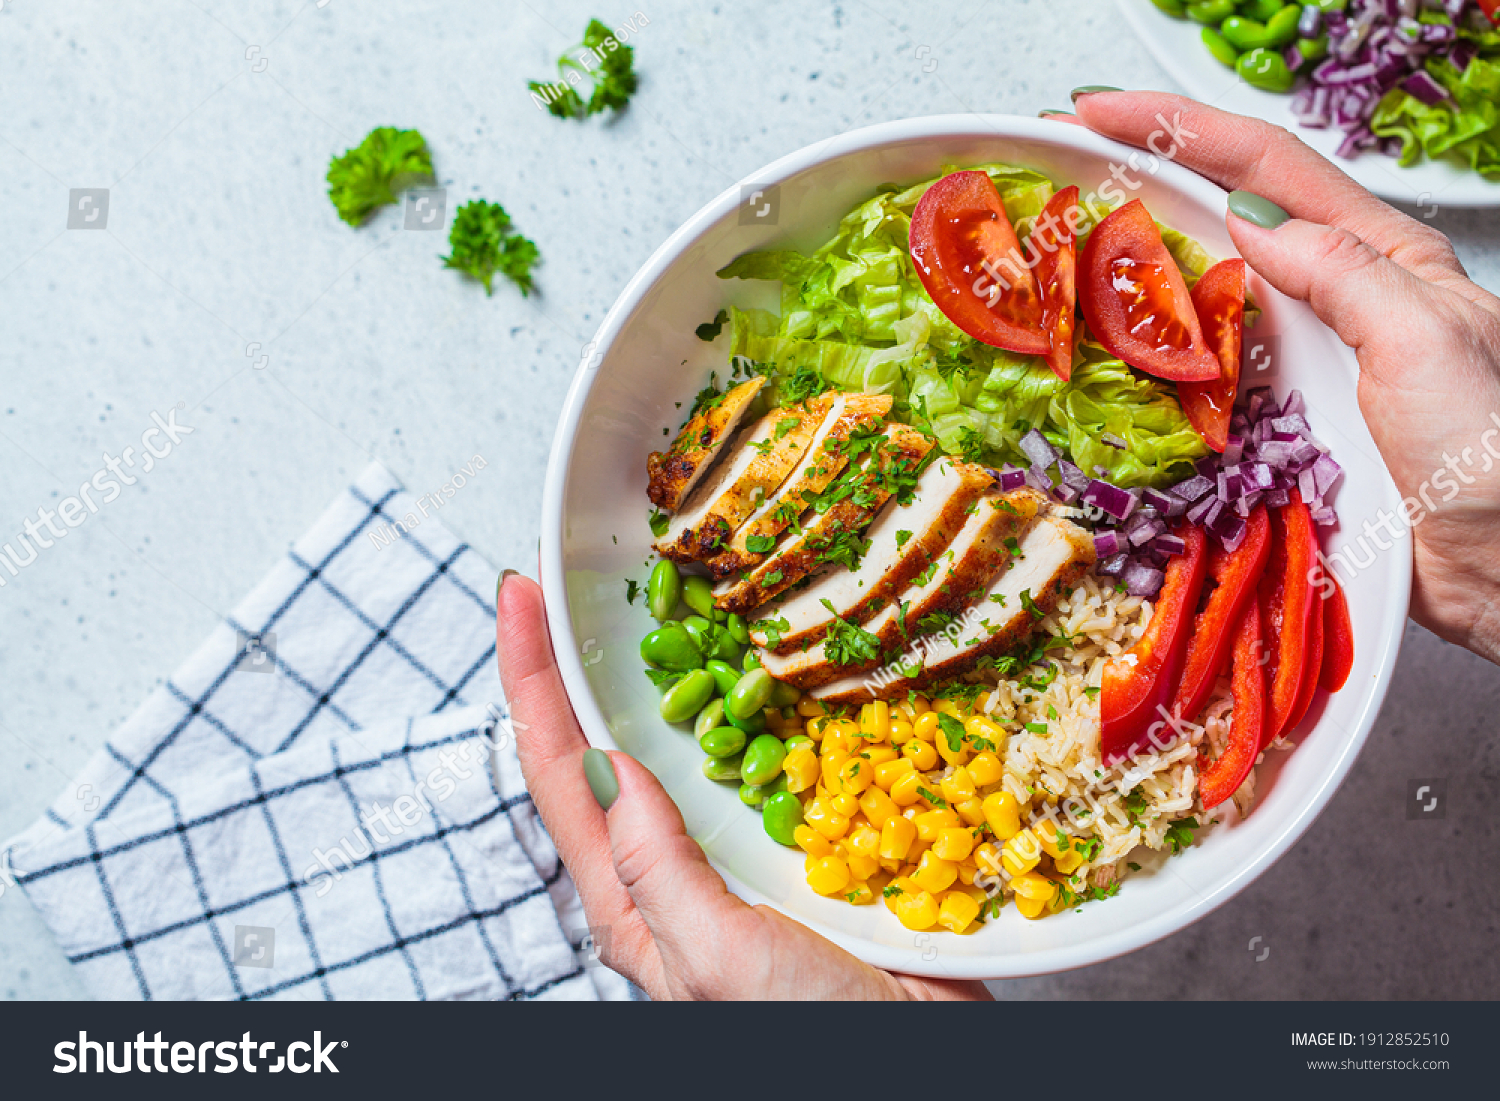 Grilled chicken breast with brown rice and vegetables in a white plate, gray background. Healthy food concept. #1912852510